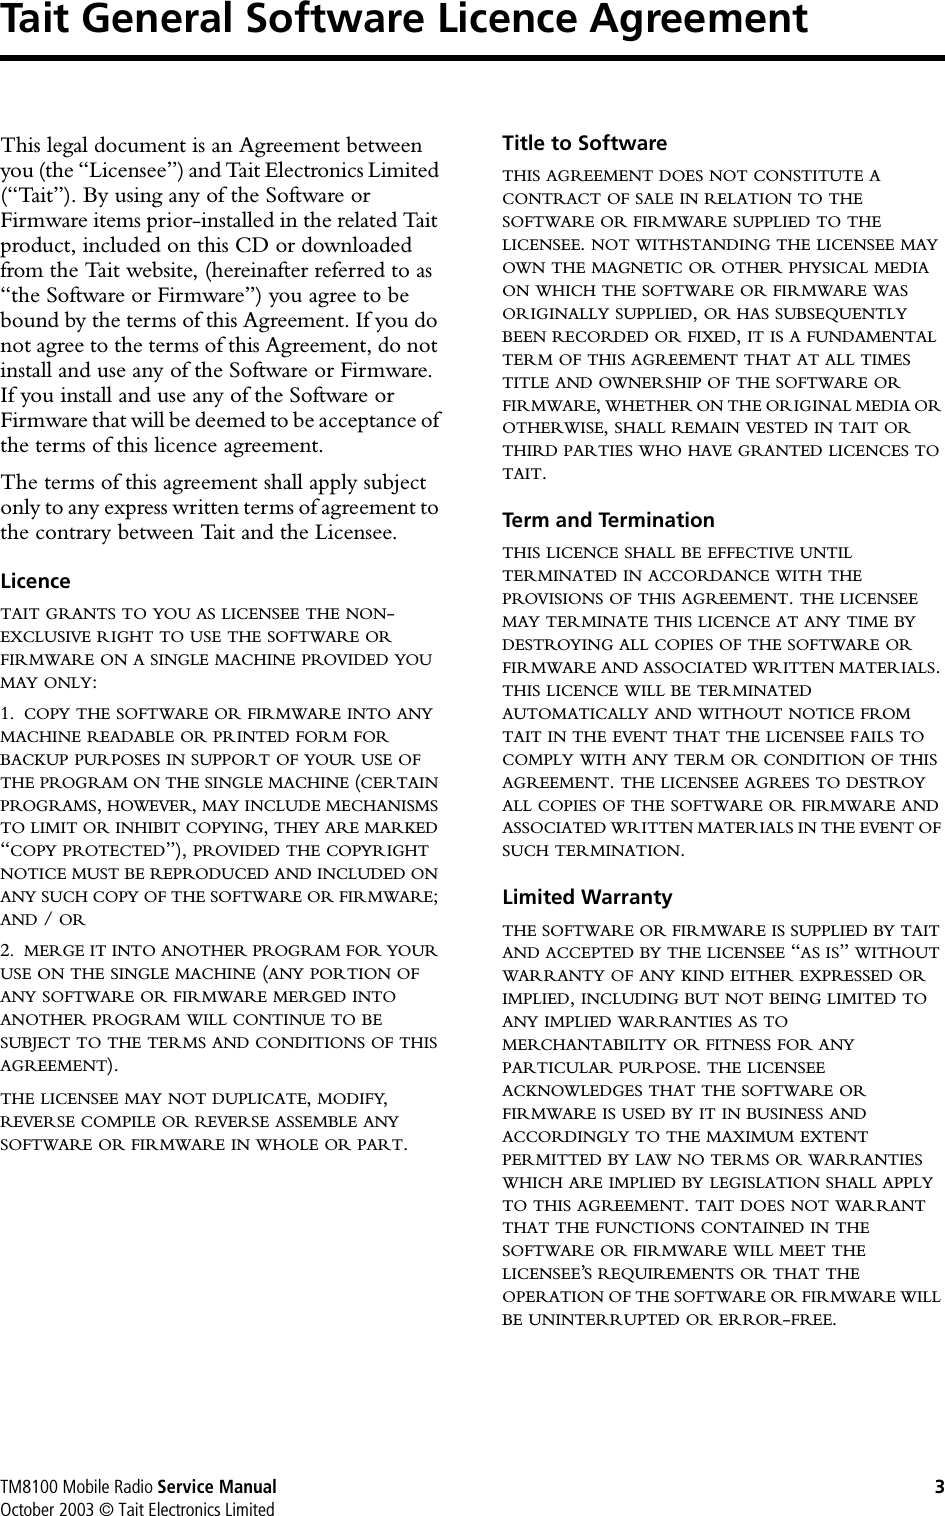 TM8100 Mobile Radio Service Manual 3October 2003 © Tait Electronics LimitedTait General Software Licence AgreementThis legal document is an Agreement between you (the “Licensee”) and Tait Electronics Limited (“Tait”). By using any of the Software or Firmware items prior-installed in the related Tait product, included on this CD or downloaded from the Tait website, (hereinafter referred to as “the Software or Firmware”) you agree to be bound by the terms of this Agreement. If you do not agree to the terms of this Agreement, do not install and use any of the Software or Firmware. If you install and use any of the Software or Firmware that will be deemed to be acceptance of the terms of this licence agreement.The terms of this agreement shall apply subject only to any express written terms of agreement to the contrary between Tait and the Licensee.LicenceTAIT GRANTS TO YOU AS LICENSEE THE NON-EXCLUSIVE RIGHT TO USE THE SOFTWARE ORFIRMWARE ON A SINGLE MACHINE PROVIDED YOUMAY ONLY:1. COPY THE SOFTWARE OR FIRMWARE INTO ANYMACHINE READABLE OR PRINTED FORM FORBACKUP PURPOSES IN SUPPORT OF YOUR USE OFTHE PROGRAM ON THE SINGLE MACHINE (CERTAINPROGRAMS,HOWEVER,MAY INCLUDE MECHANISMSTO LIMIT OR INHIBIT COPYING,THEY ARE MARKED“COPY PROTECTED”), PROVIDED THE COPYRIGHTNOTICE MUST BE REPRODUCED AND INCLUDED ONANY SUCH COPY OF THE SOFTWARE OR FIRMWARE;AND / OR2. MERGE IT INTO ANOTHER PROGRAM FOR YOURUSE ON THE SINGLE MACHINE (ANY PORTION OFANY SOFTWARE OR FIRMWARE MERGED INTOANOTHER PROGRAM WILL CONTINUE TO BESUBJECT TO THE TERMS AND CONDITIONS OF THISAGREEMENT).THE LICENSEE MAY NOT DUPLICATE,MODIFY,REVERSE COMPILE OR REVERSE ASSEMBLE ANYSOFTWARE OR FIRMWARE IN WHOLE OR PART.Title to Software THIS AGREEMENT DOES NOT CONSTITUTE ACONTRACT OF SALE IN RELATION TO THESOFTWARE OR FIRMWARE SUPPLIED TO THELICENSEE.NOT WITHSTANDING THE LICENSEE MAYOWN THE MAGNETIC OR OTHER PHYSICAL MEDIAON WHICH THE SOFTWARE OR FIRMWARE WASORIGINALLY SUPPLIED,OR HAS SUBSEQUENTLYBEEN RECORDED OR FIXED,IT IS A FUNDAMENTALTERM OF THIS AGREEMENT THAT AT ALL TIMESTITLE AND OWNERSHIP OF THE SOFTWARE ORFIRMWARE,WHETHER ON THE ORIGINAL MEDIA OROTHERWISE,SHALL REMAIN VESTED IN TAIT ORTHIRD PARTIES WHO HAVE GRANTED LICENCES TOTAIT.Term and Termination THIS LICENCE SHALL BE EFFECTIVE UNTILTERMINATED IN ACCORDANCE WITH THEPROVISIONS OF THIS AGREEMENT.THE LICENSEEMAY TERMINATE THIS LICENCE AT ANY TIME BYDESTROYING ALL COPIES OF THE SOFTWARE ORFIRMWARE AND ASSOCIATED WRITTEN MATERIALS.THIS LICENCE WILL BE TERMINATEDAUTOMATICALLY AND WITHOUT NOTICE FROMTAIT IN THE EVENT THAT THE LICENSEE FAILS TOCOMPLY WITH ANY TERM OR CONDITION OF THISAGREEMENT.THE LICENSEE AGREES TO DESTROYALL COPIES OF THE SOFTWARE OR FIRMWARE ANDASSOCIATED WRITTEN MATERIALS IN THE EVENT OFSUCH TERMINATION.Limited Warranty THE SOFTWARE OR FIRMWARE IS SUPPLIED BY TAITAND ACCEPTED BY THE LICENSEE “AS IS”WITHOUTWARRANTY OF ANY KIND EITHER EXPRESSED ORIMPLIED,INCLUDING BUT NOT BEING LIMITED TOANY IMPLIED WARRANTIES AS TOMERCHANTABILITY OR FITNESS FOR ANYPARTICULAR PURPOSE.THE LICENSEEACKNOWLEDGES THAT THE SOFTWARE ORFIRMWARE IS USED BY IT IN BUSINESS ANDACCORDINGLY TO THE MAXIMUM EXTENTPERMITTED BY LAW NO TERMS OR WARRANTIESWHICH ARE IMPLIED BY LEGISLATION SHALL APPLYTO THIS AGREEMENT.TAIT DOES NOT WARRANTTHAT THE FUNCTIONS CONTAINED IN THESOFTWARE OR FIRMWARE WILL MEET THELICENSEE’S REQUIREMENTS OR THAT THEOPERATION OF THE SOFTWARE OR FIRMWARE WILLBE UNINTERRUPTED OR ERROR-FREE.